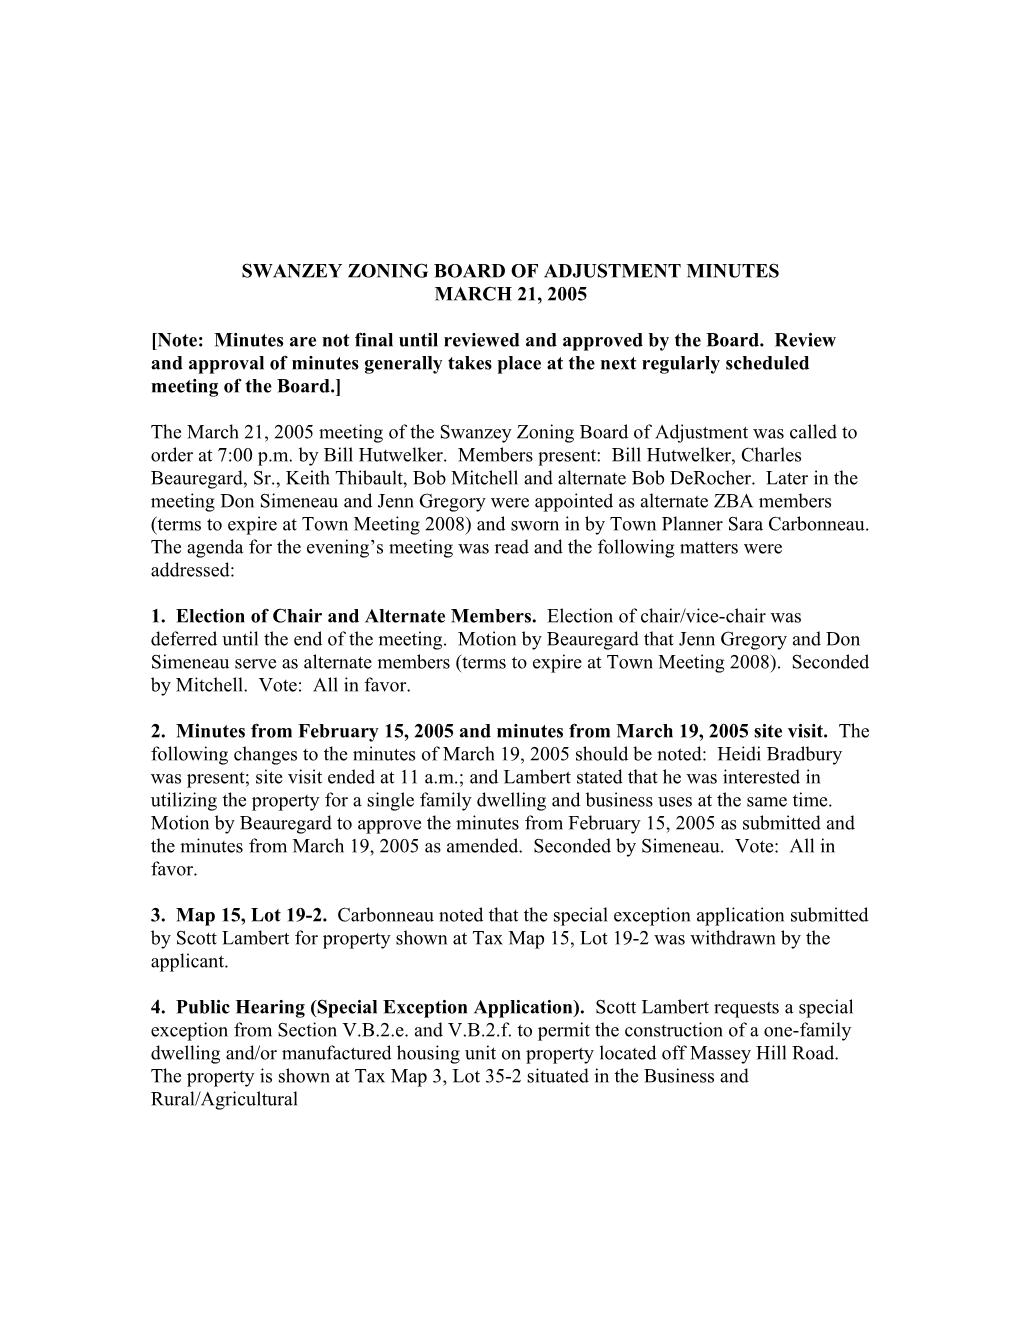 Swanzey Zoning Board of Adjustment Minutes